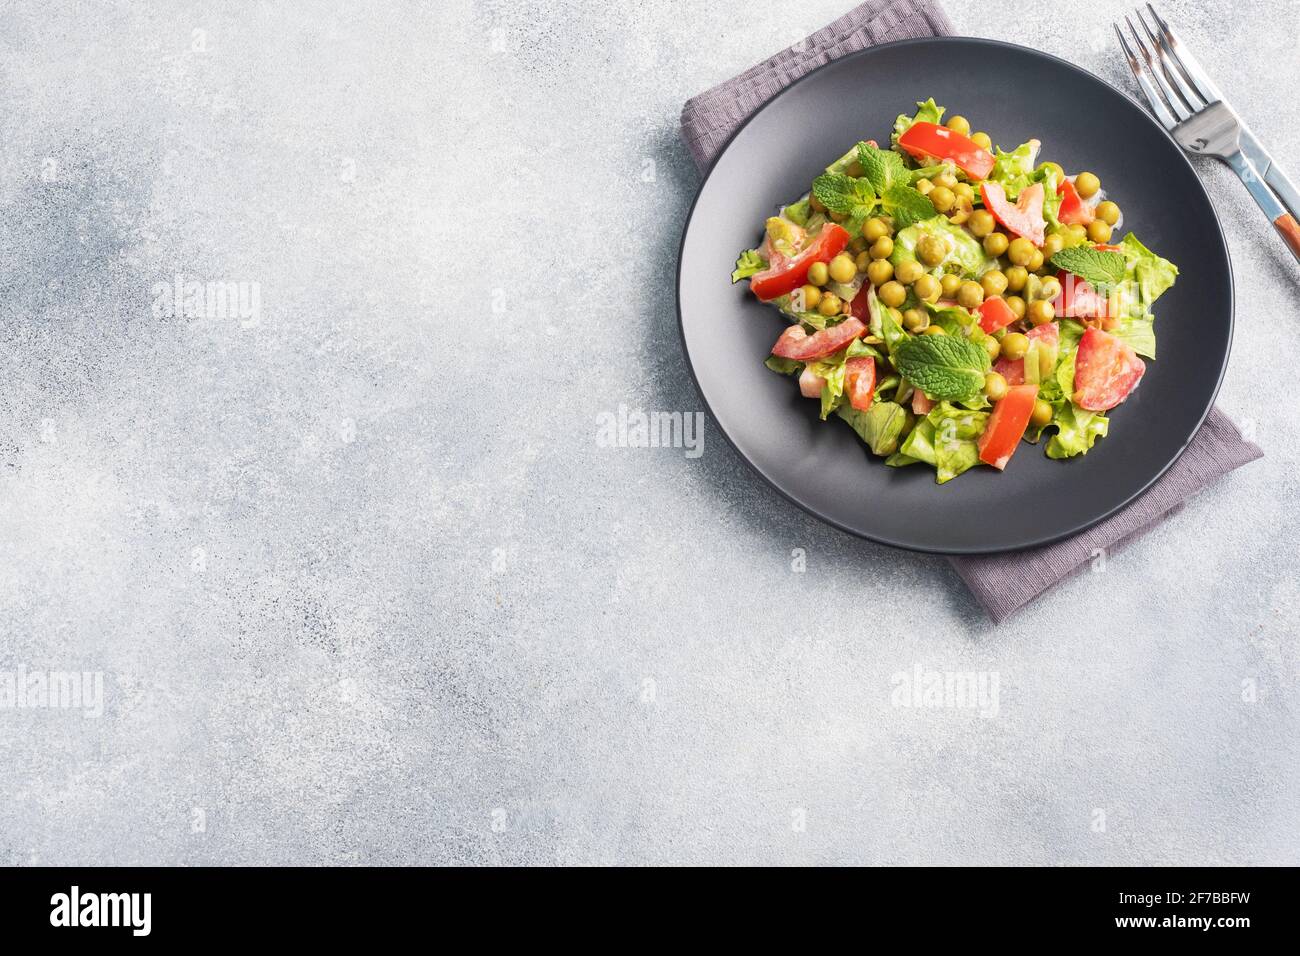 Salad of green tomato leaves and canned peas seasoned with sauce on a black plate. Spring fresh diet salad top view copy space. Stock Photo